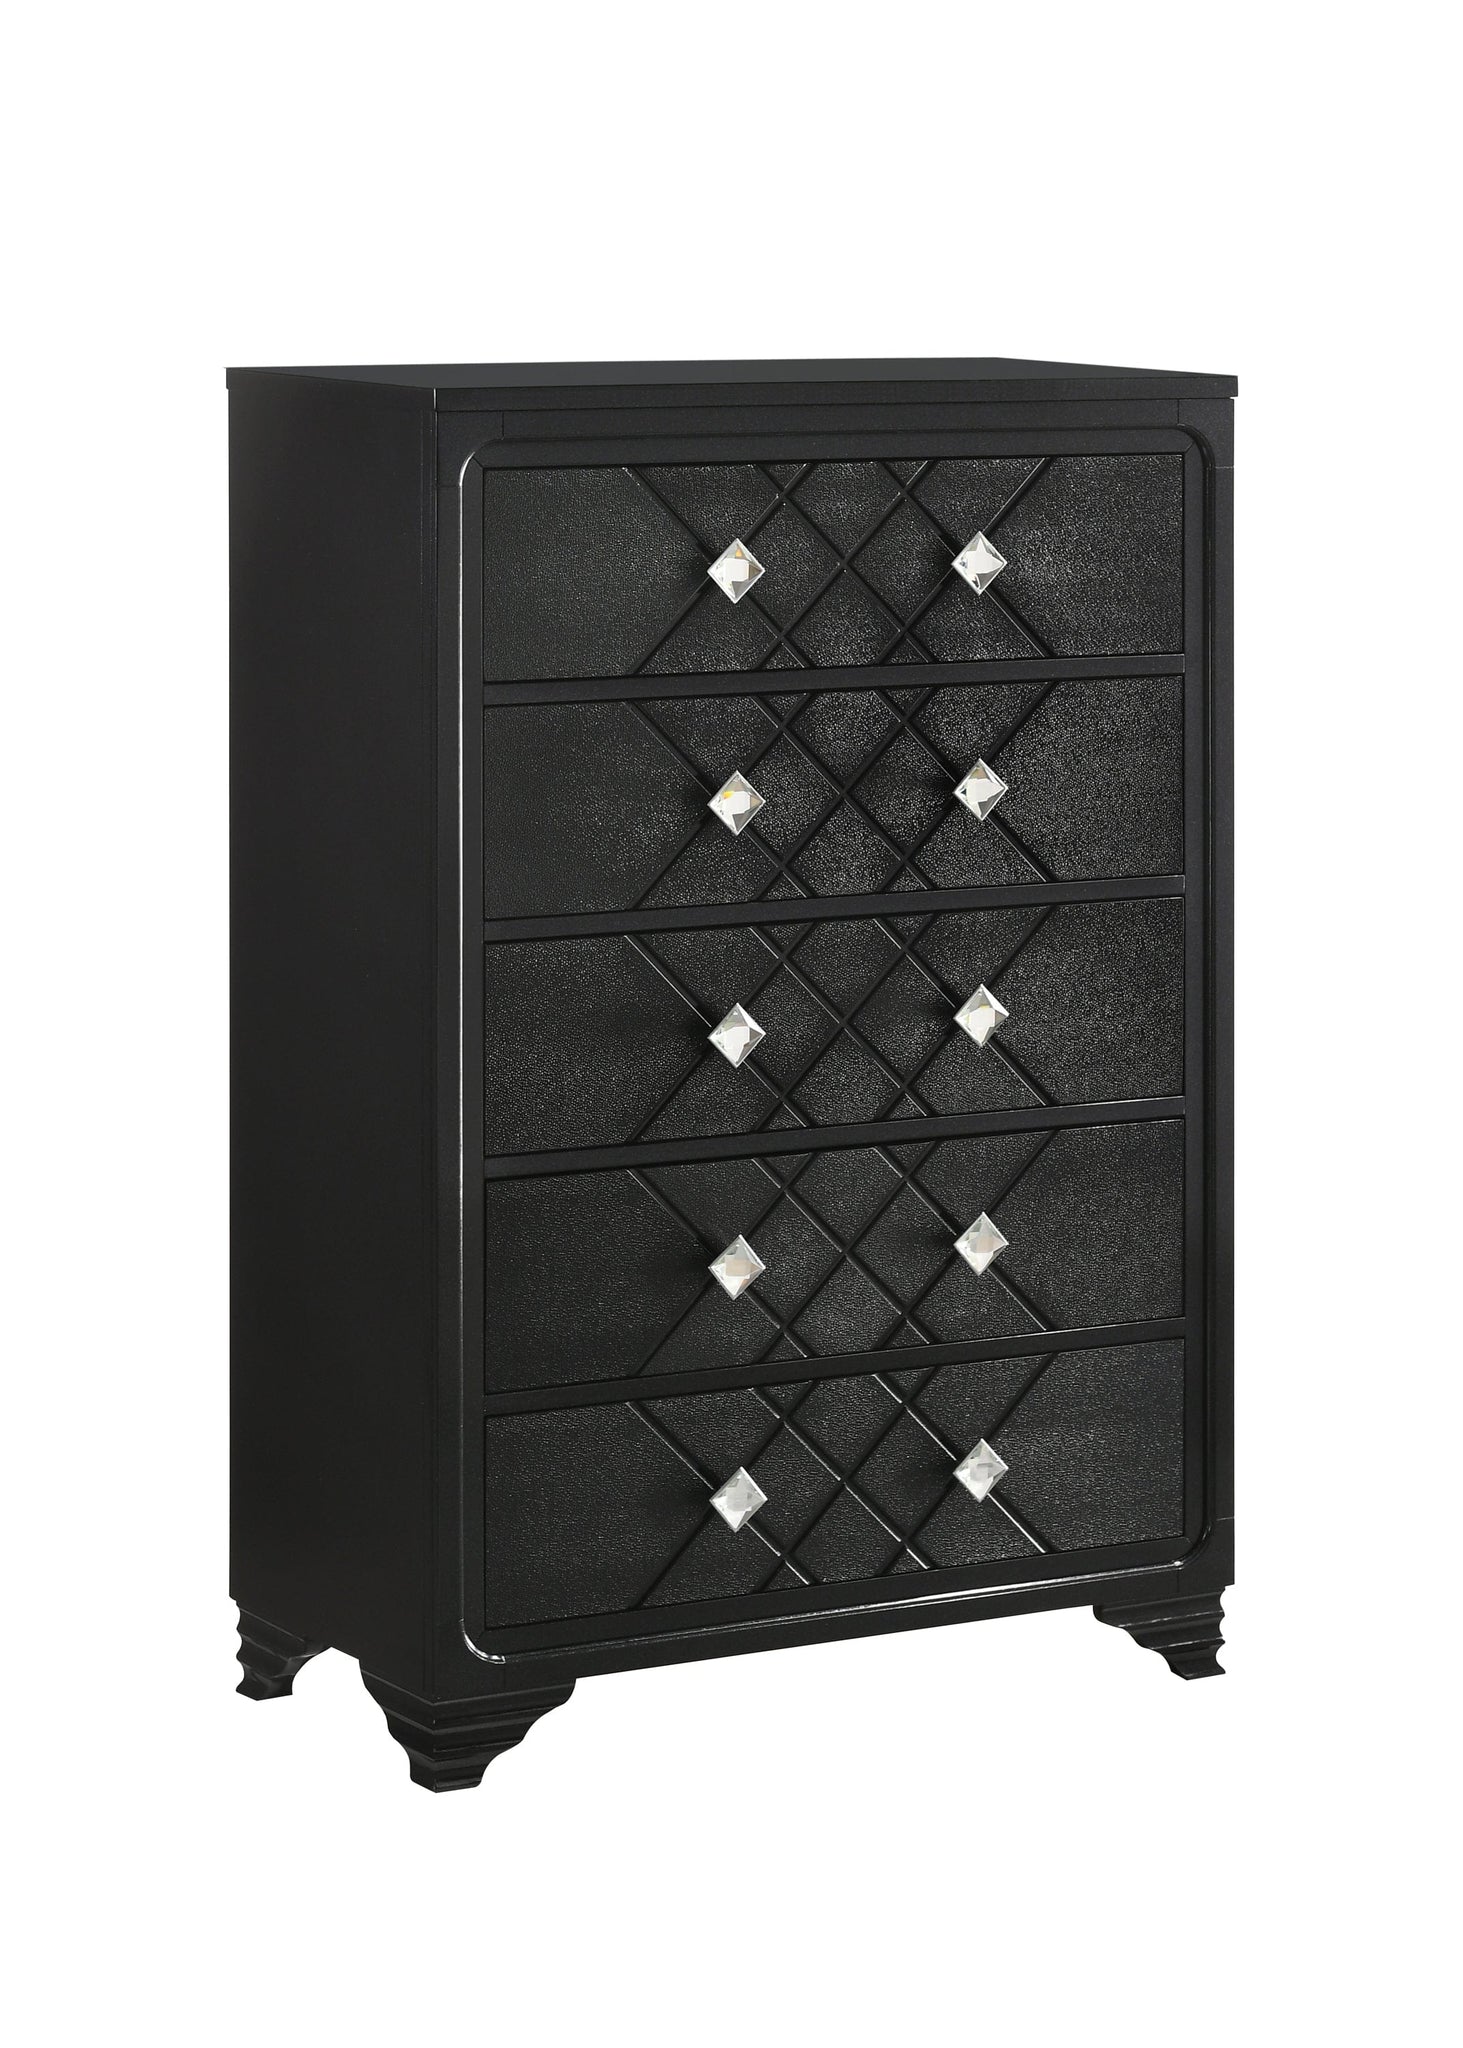 Penelope 5-Drawer Chest Black, Choose This Five-Drawer Chest For It's Exceptional Design And Storage Options, Enjoy The Stylish Diamond Shaped Hardware For An Extra Touch Of Sparkle. SKU: 223575